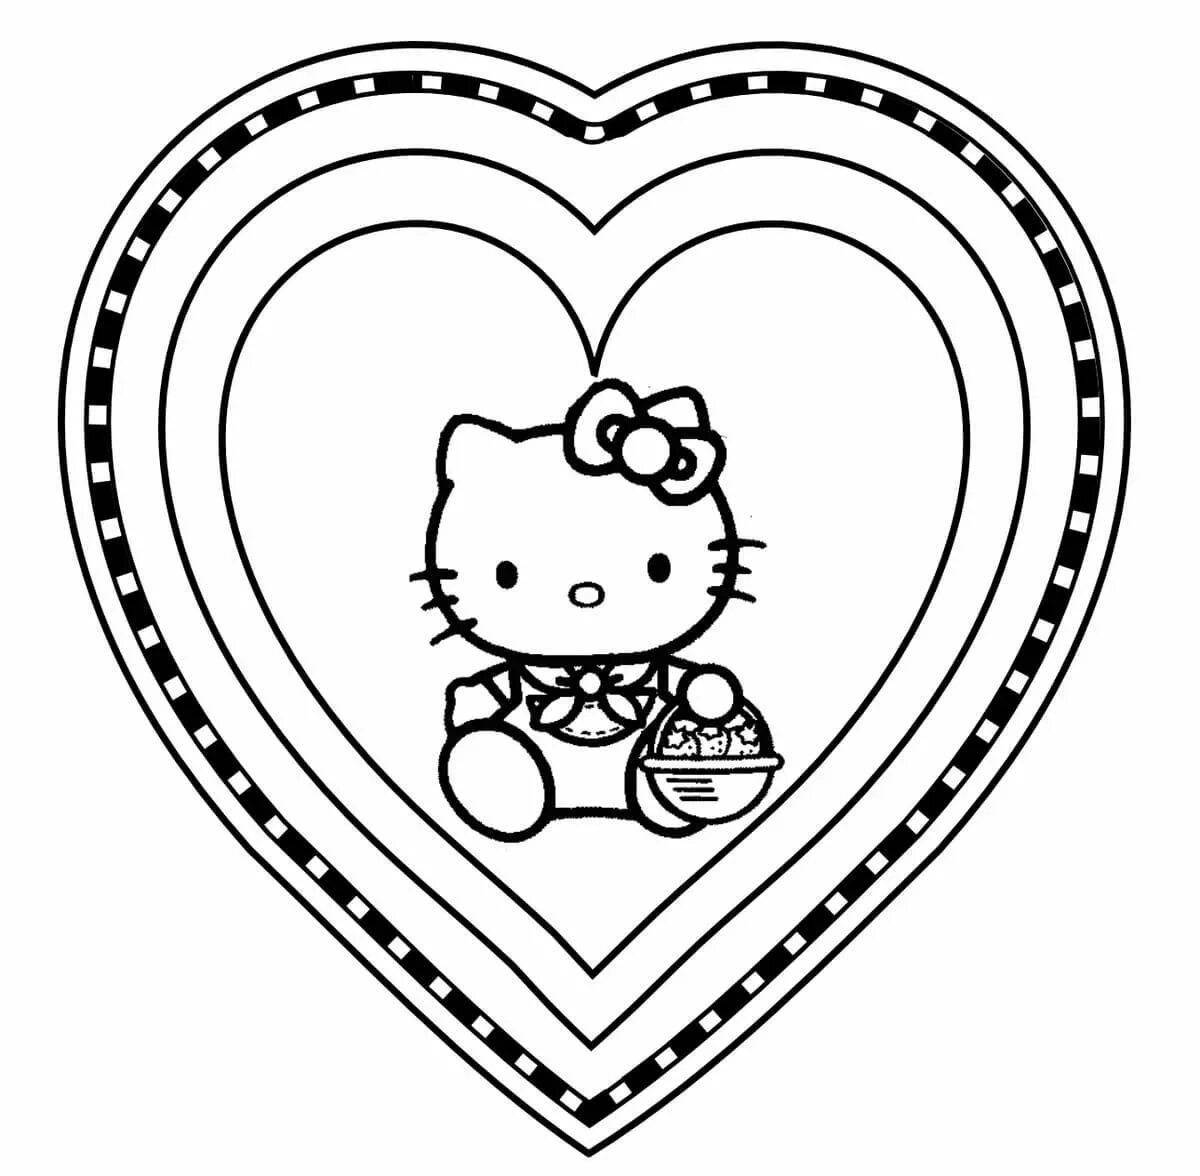 Colorful valentine coloring pages for kids